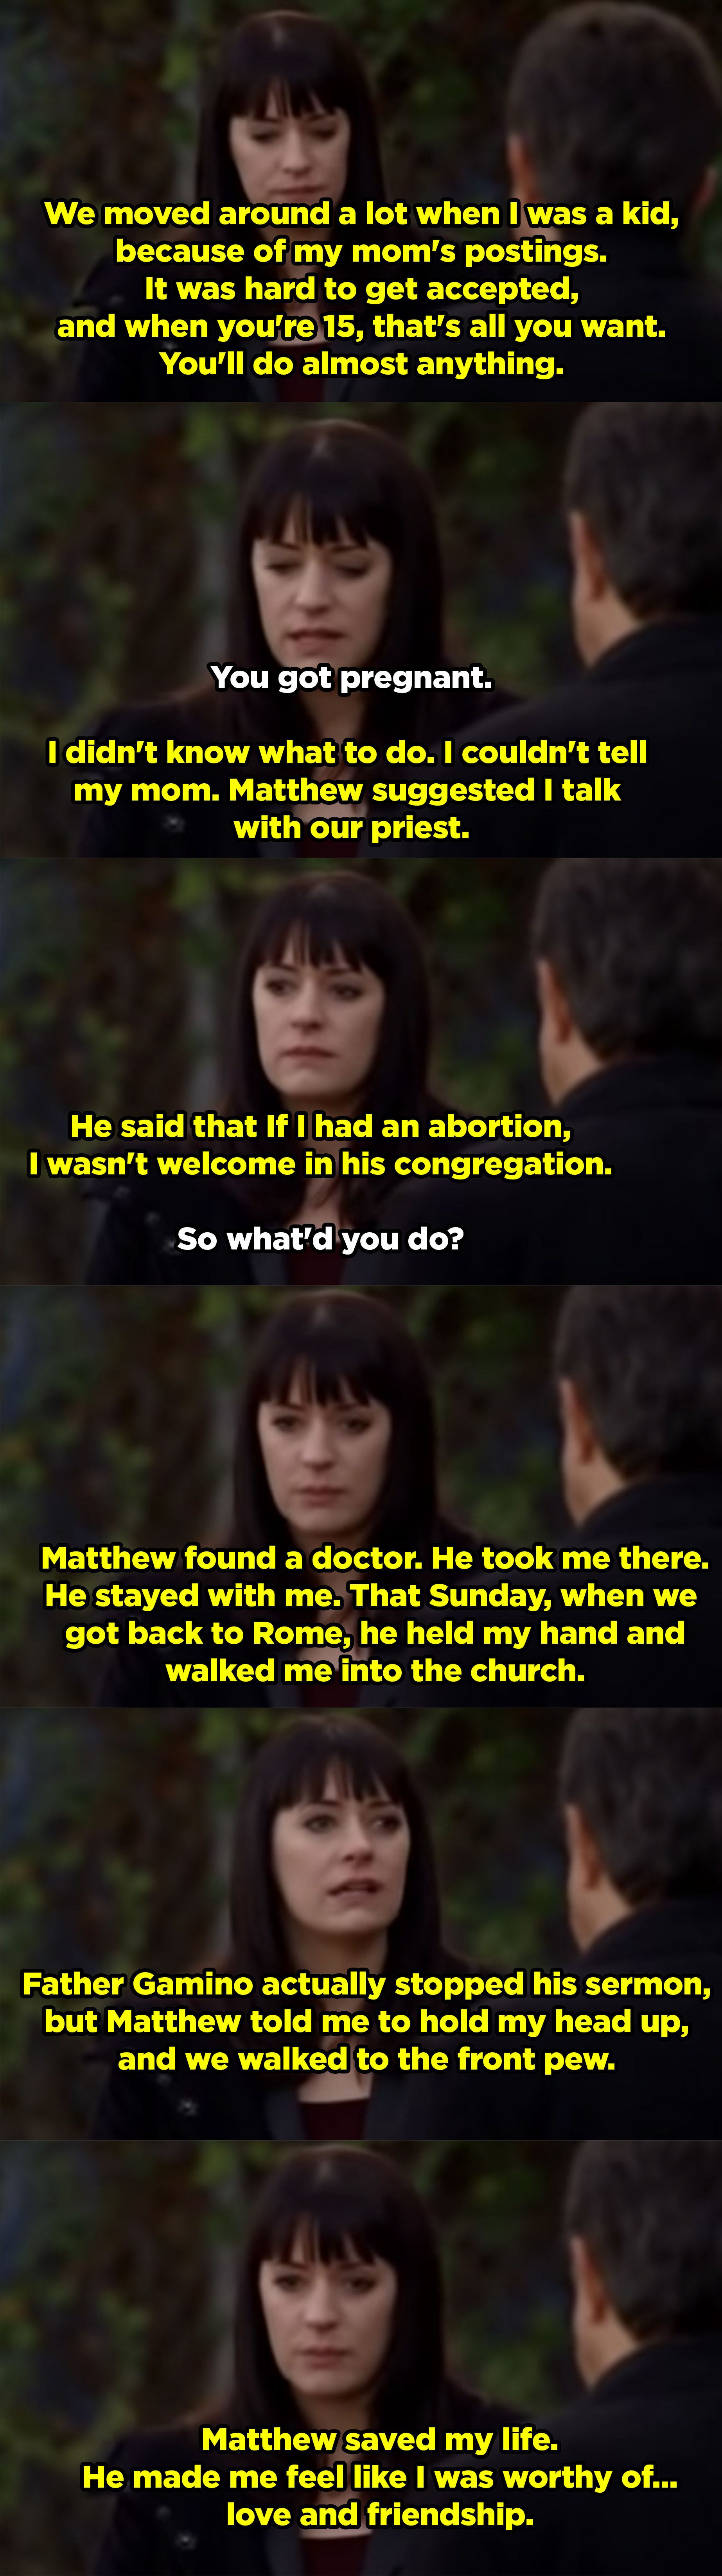 Emily explaining to Rossi that she got pregnant as a teenager and her friend Matthew helped her get an abortion, and then afterwards he started to question his religion